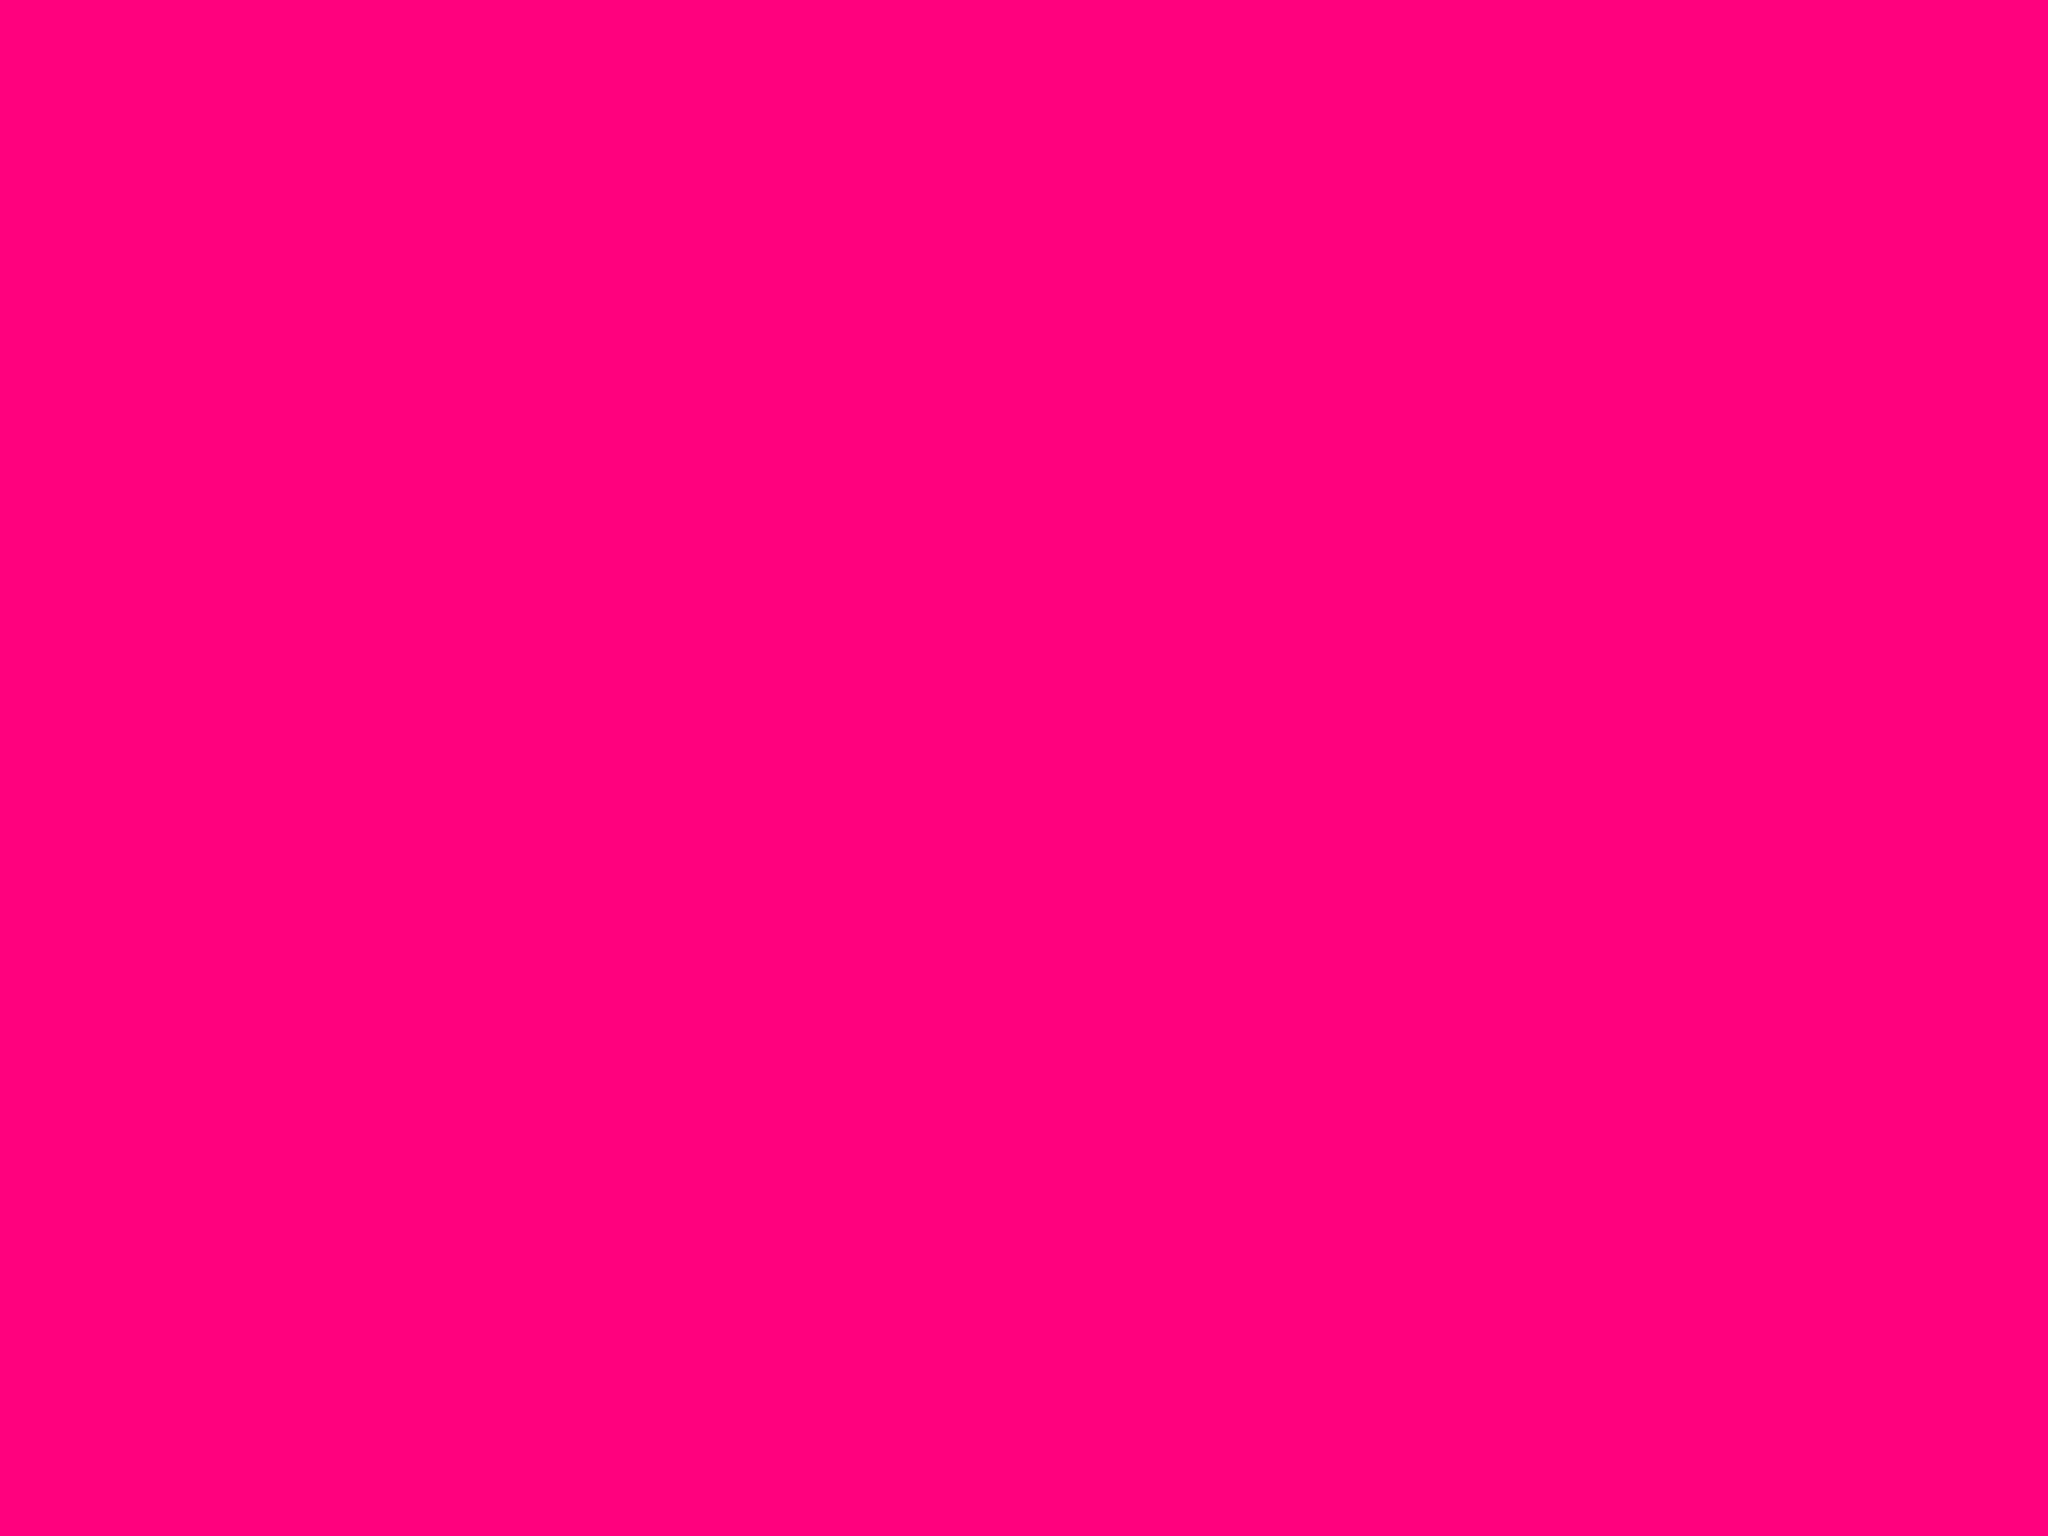 Top Plain Bright Pink Background Wallpaper